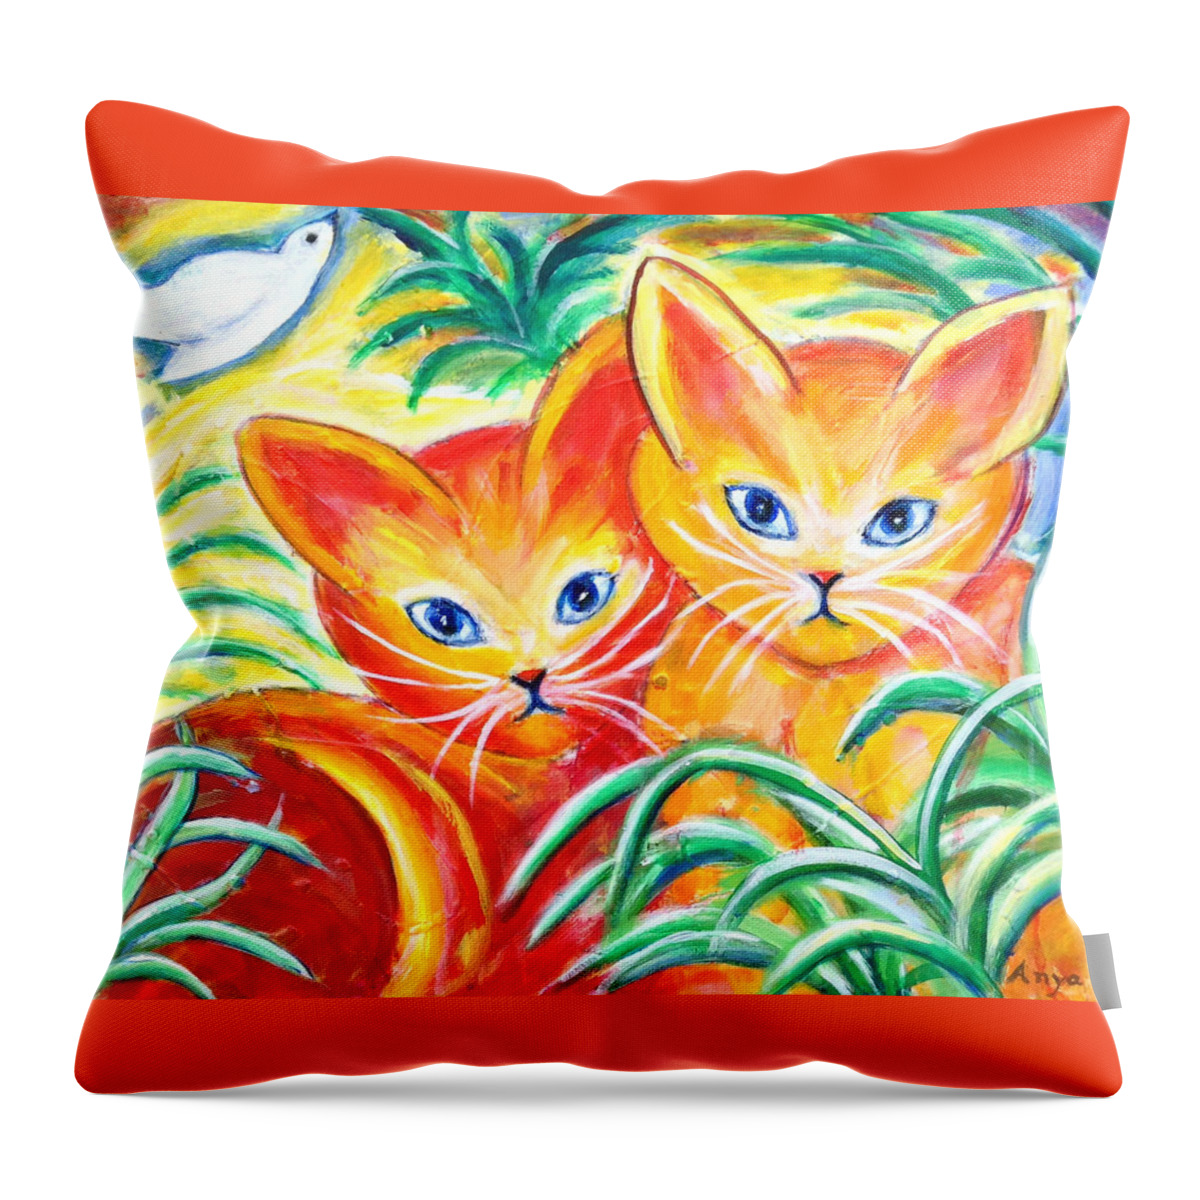 Cats Throw Pillow featuring the painting Two Cats by Anya Heller